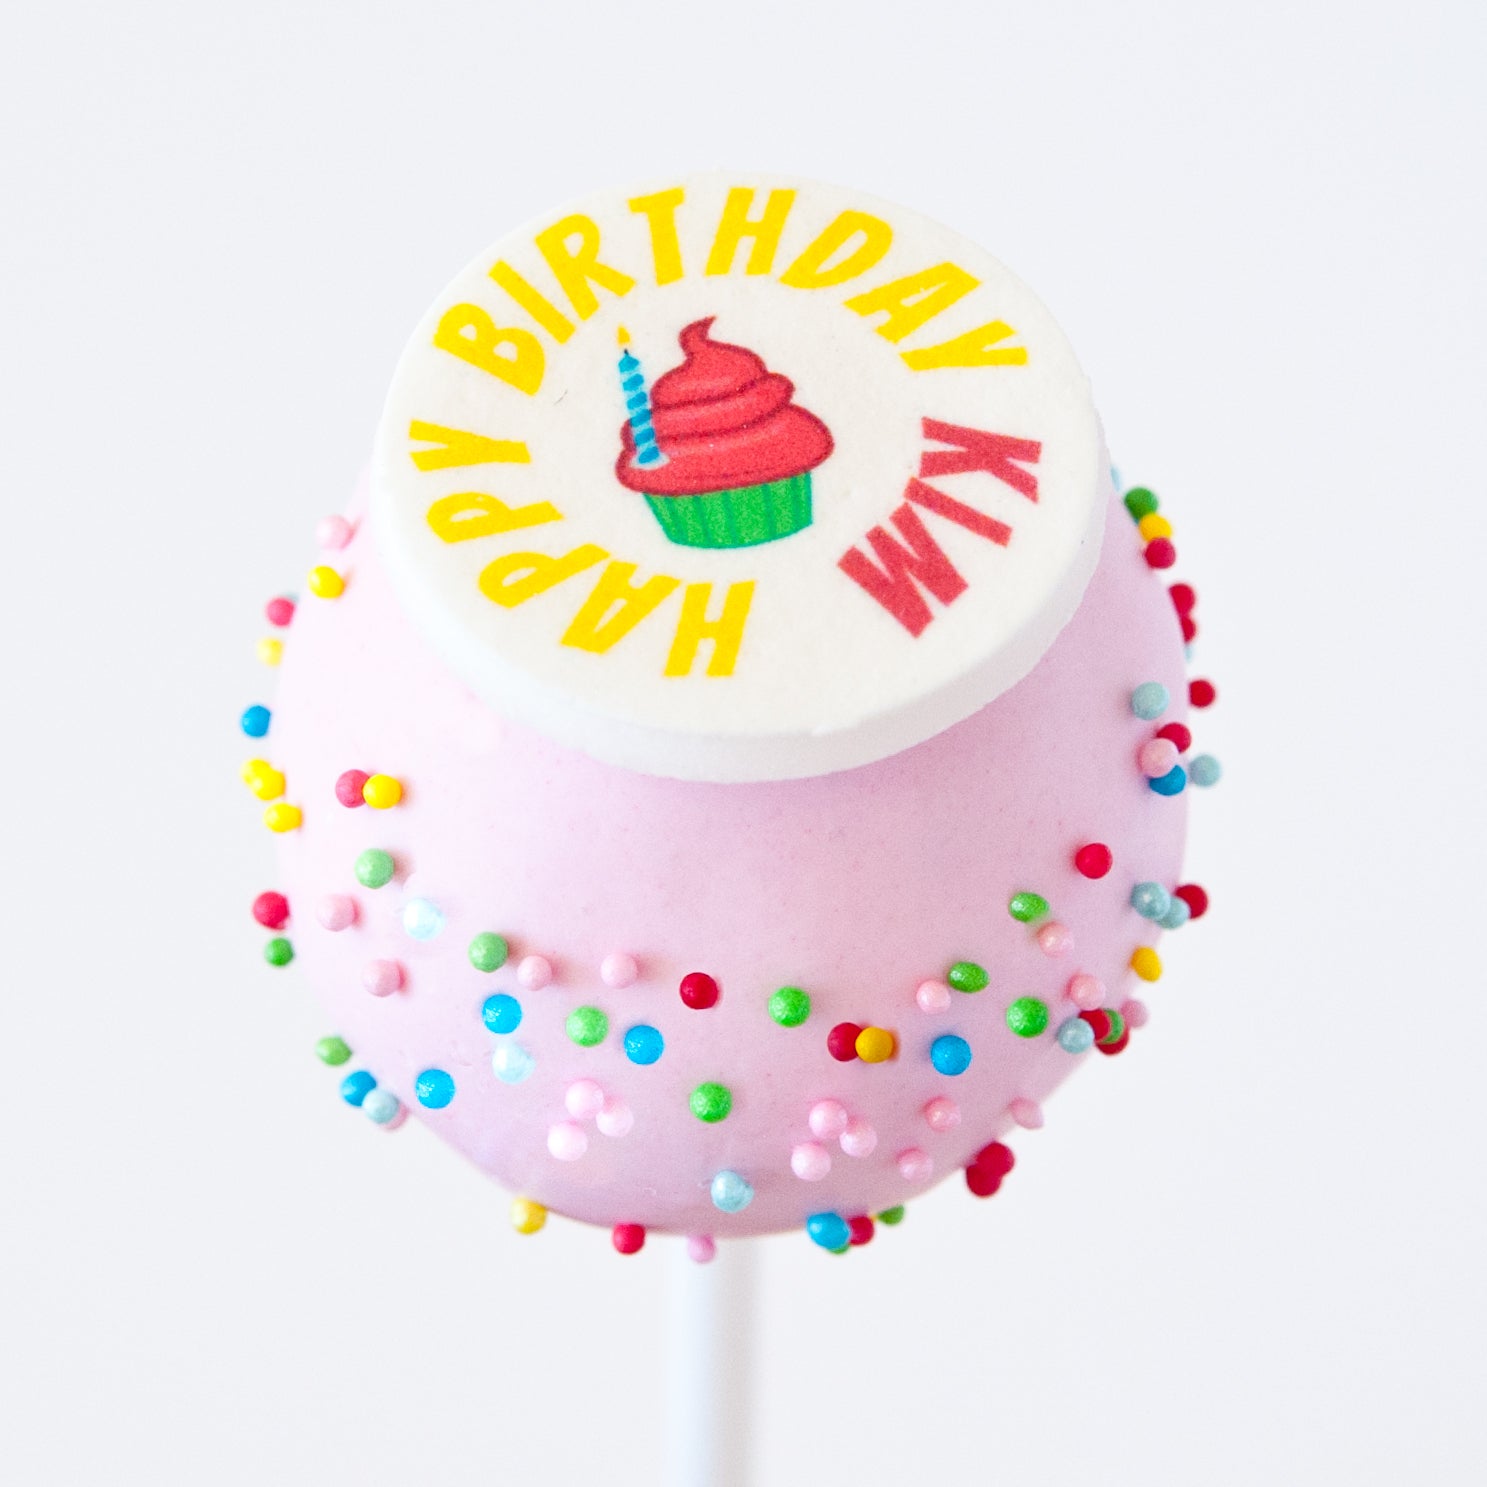 Creamy Cake Pops in Mylapore,Chennai - Best Cake Shops in Chennai - Justdial